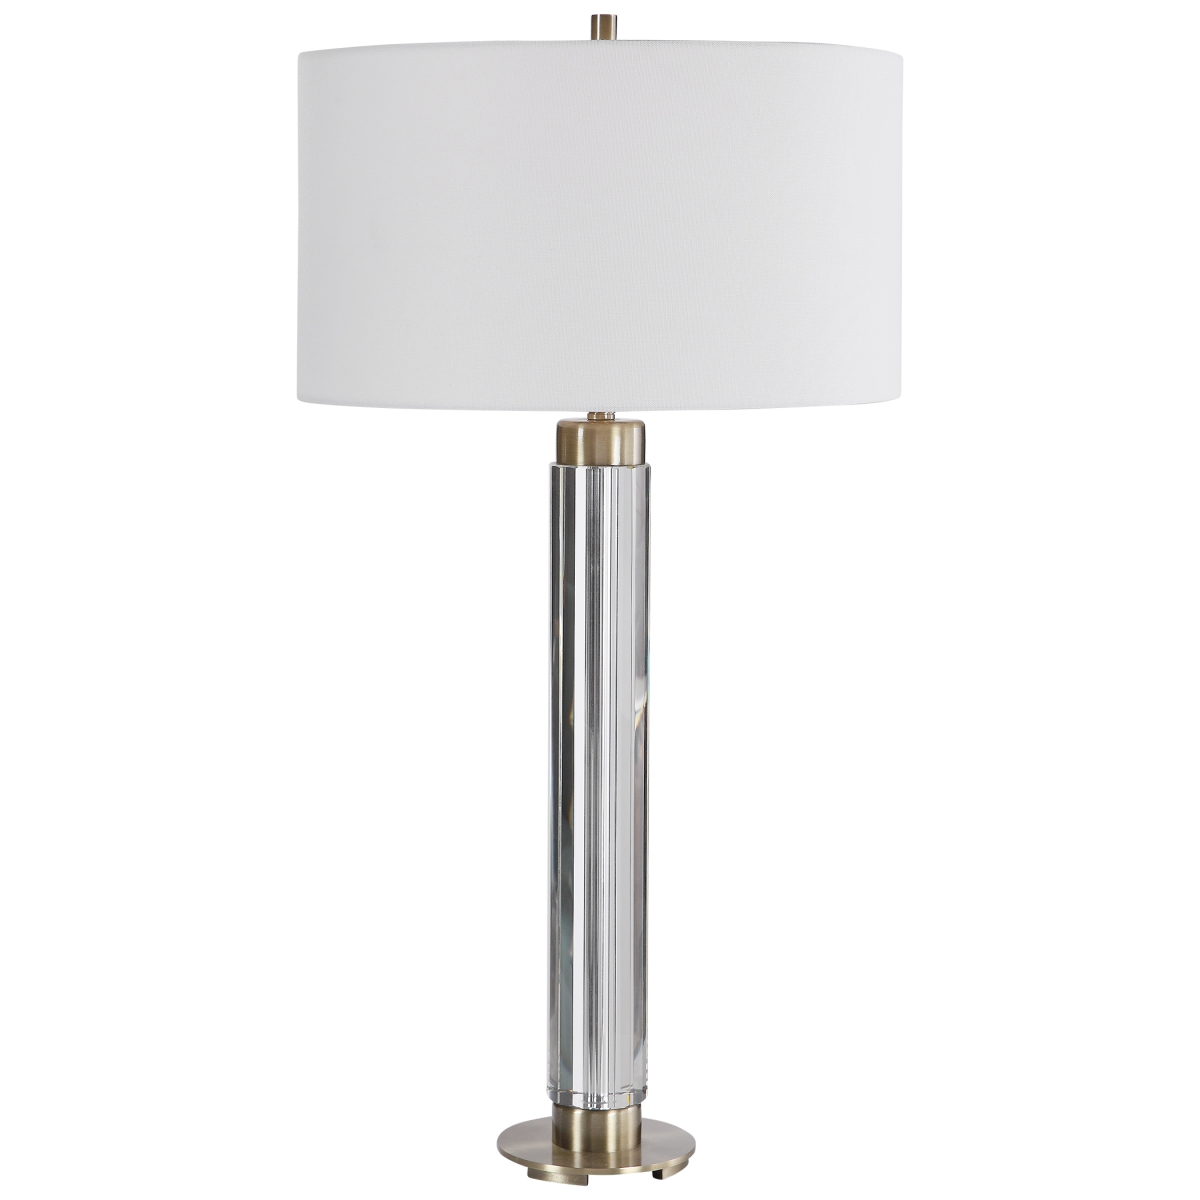 Picture of 212 Main 26361 Davies Modern Table Lamp